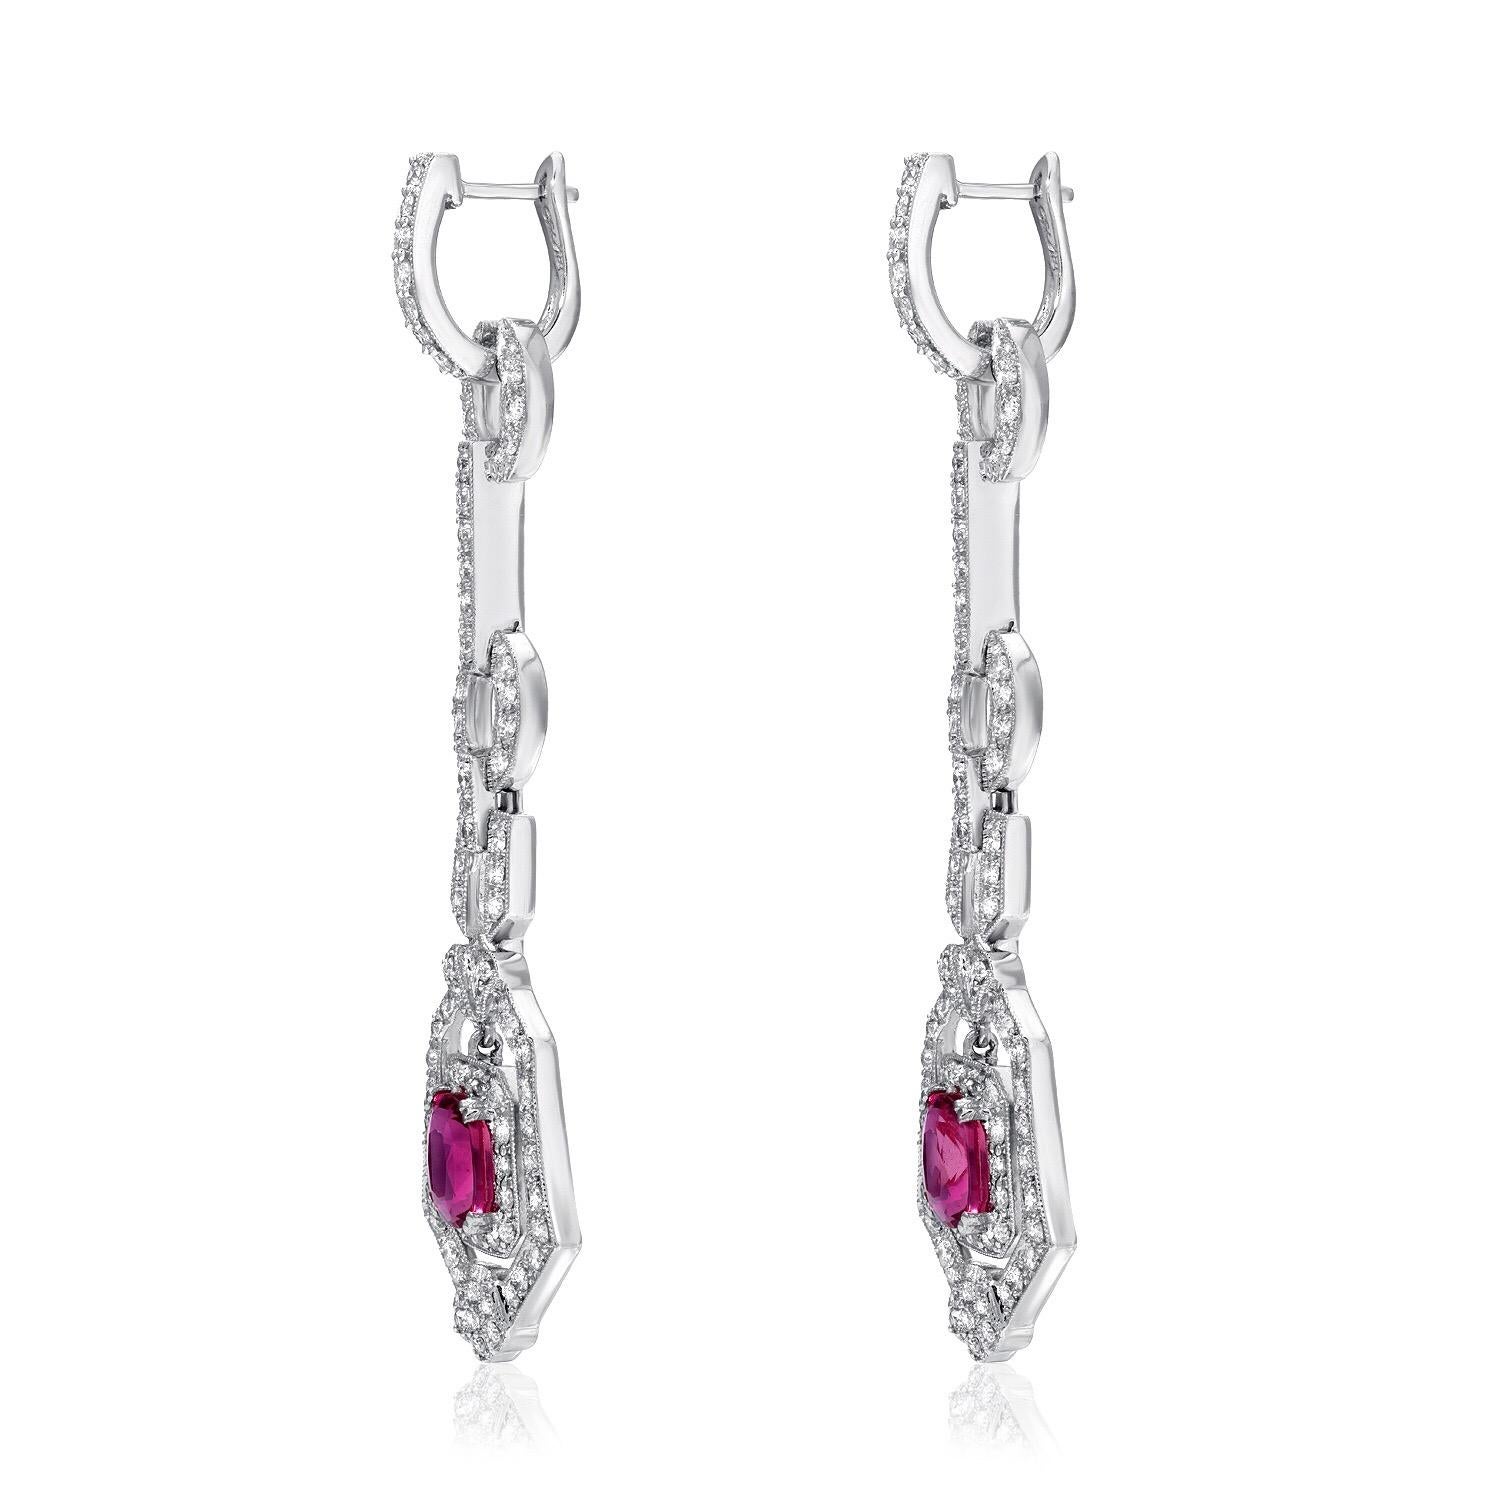 Pink Sapphire earrings displaying a pair of cushion cut Pink Sapphires weighing a total of 2.90 carats, accented by a total of 2.00 round diamonds, in 18K white gold. The lever back diamond set tops can be removed and worn separately as huggie hoop